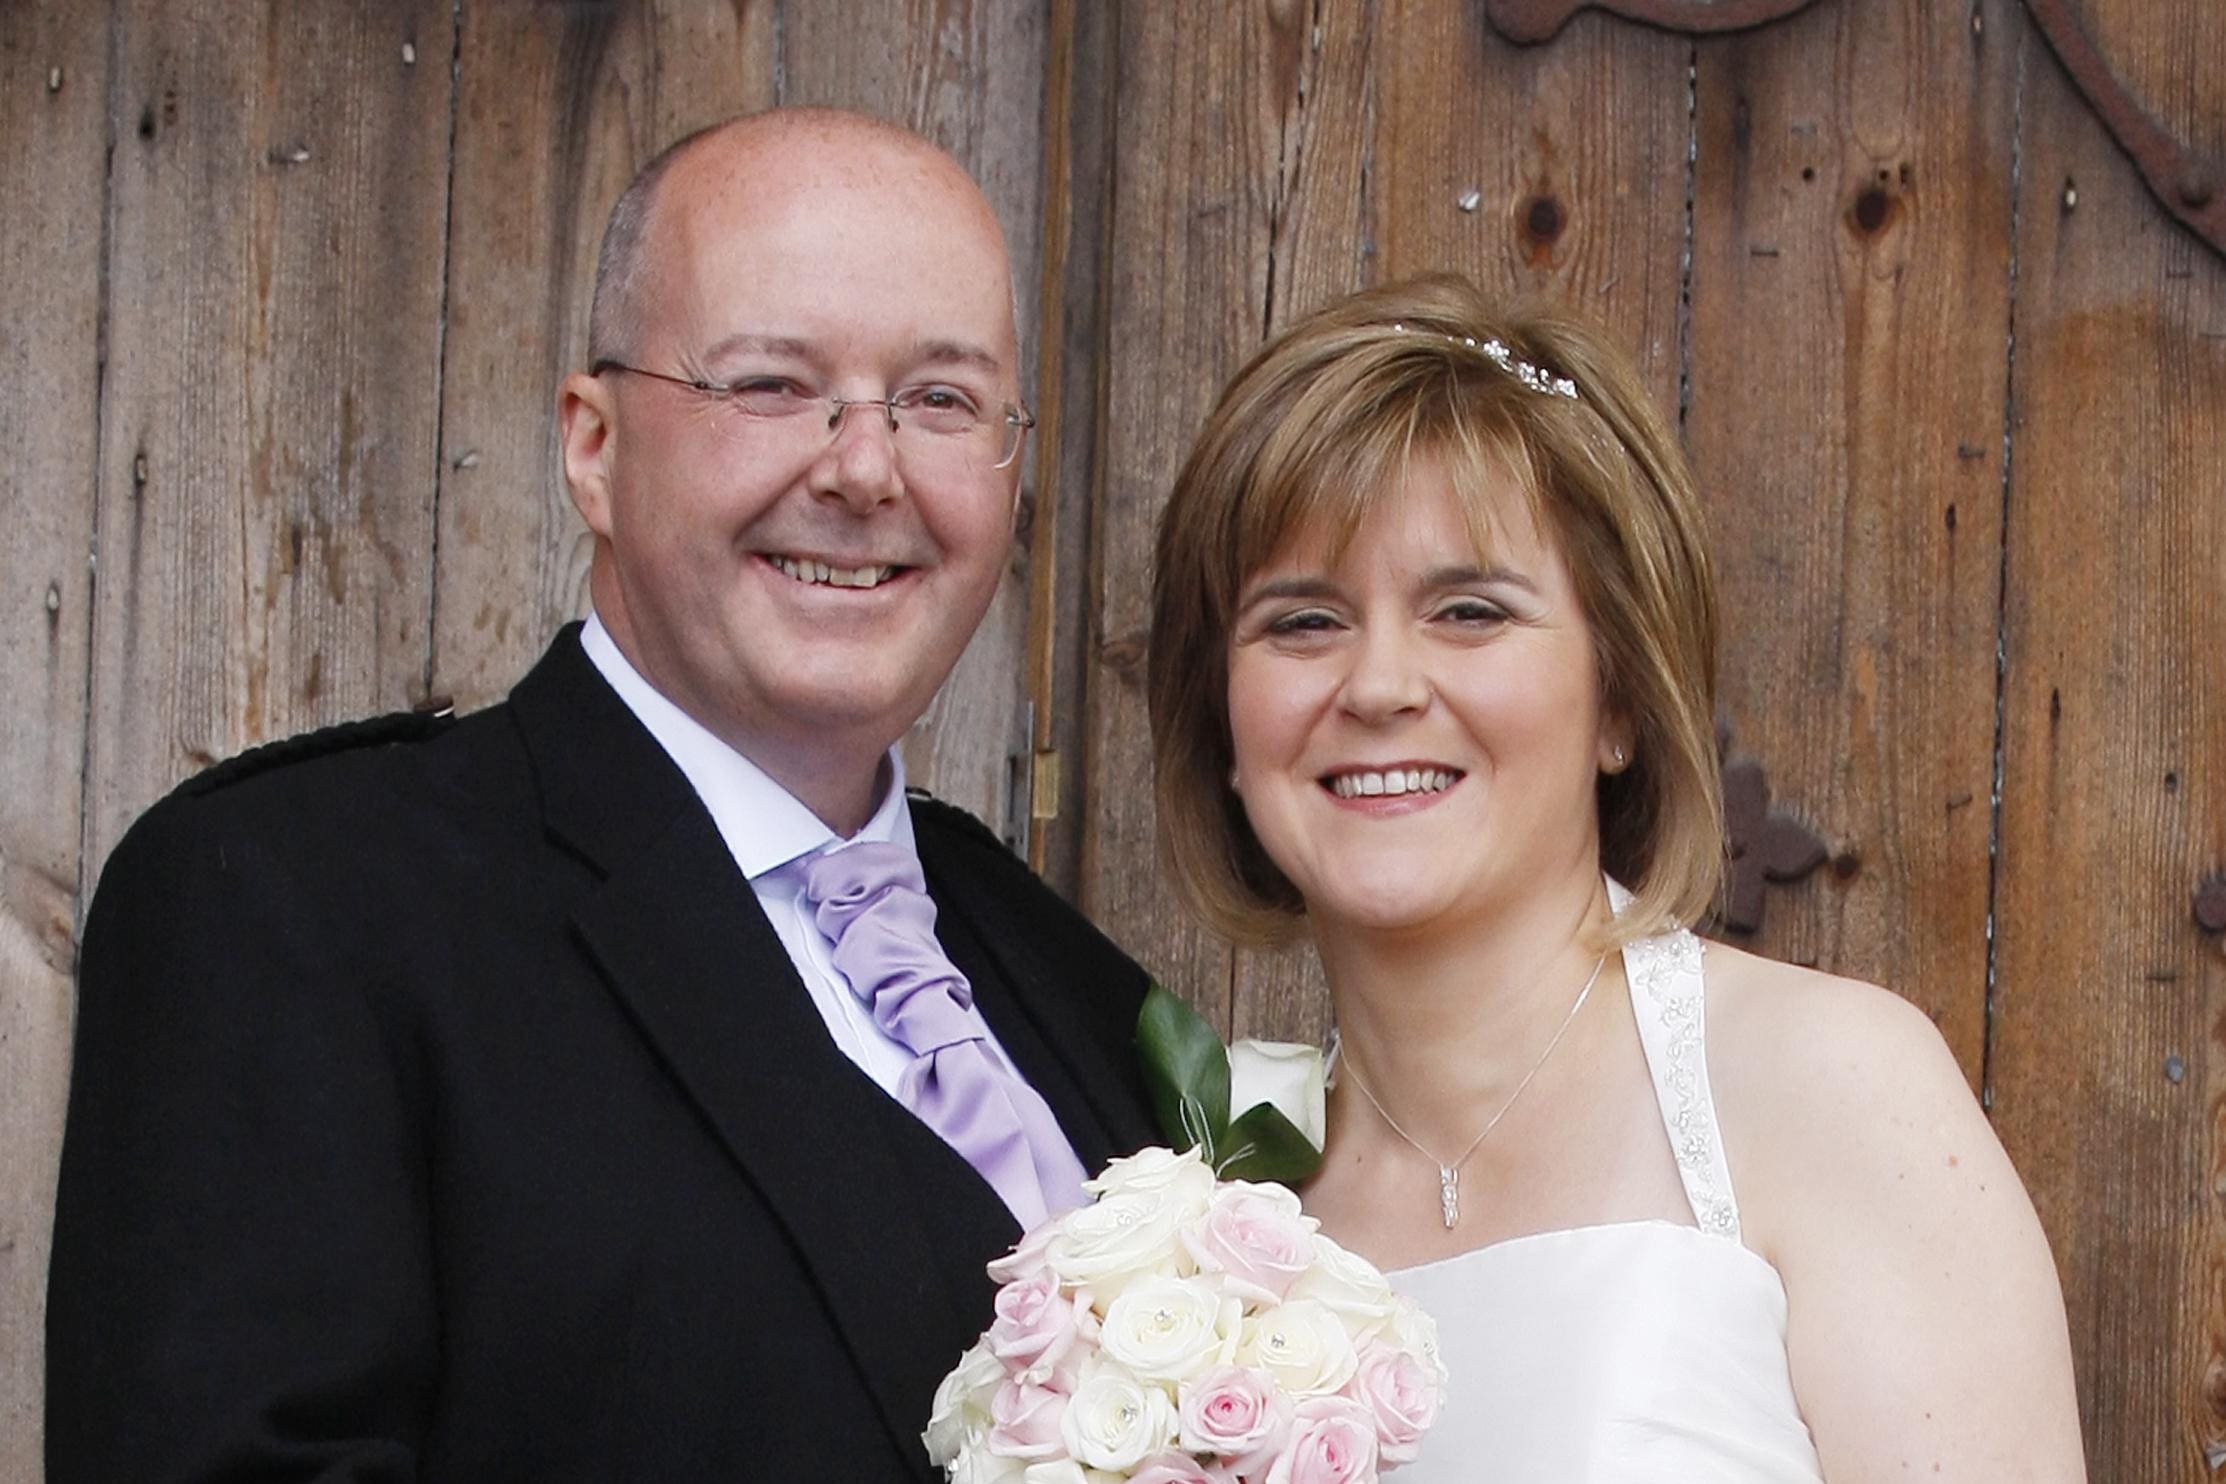 Mr Murrell and Ms Sturgeon married in 2010